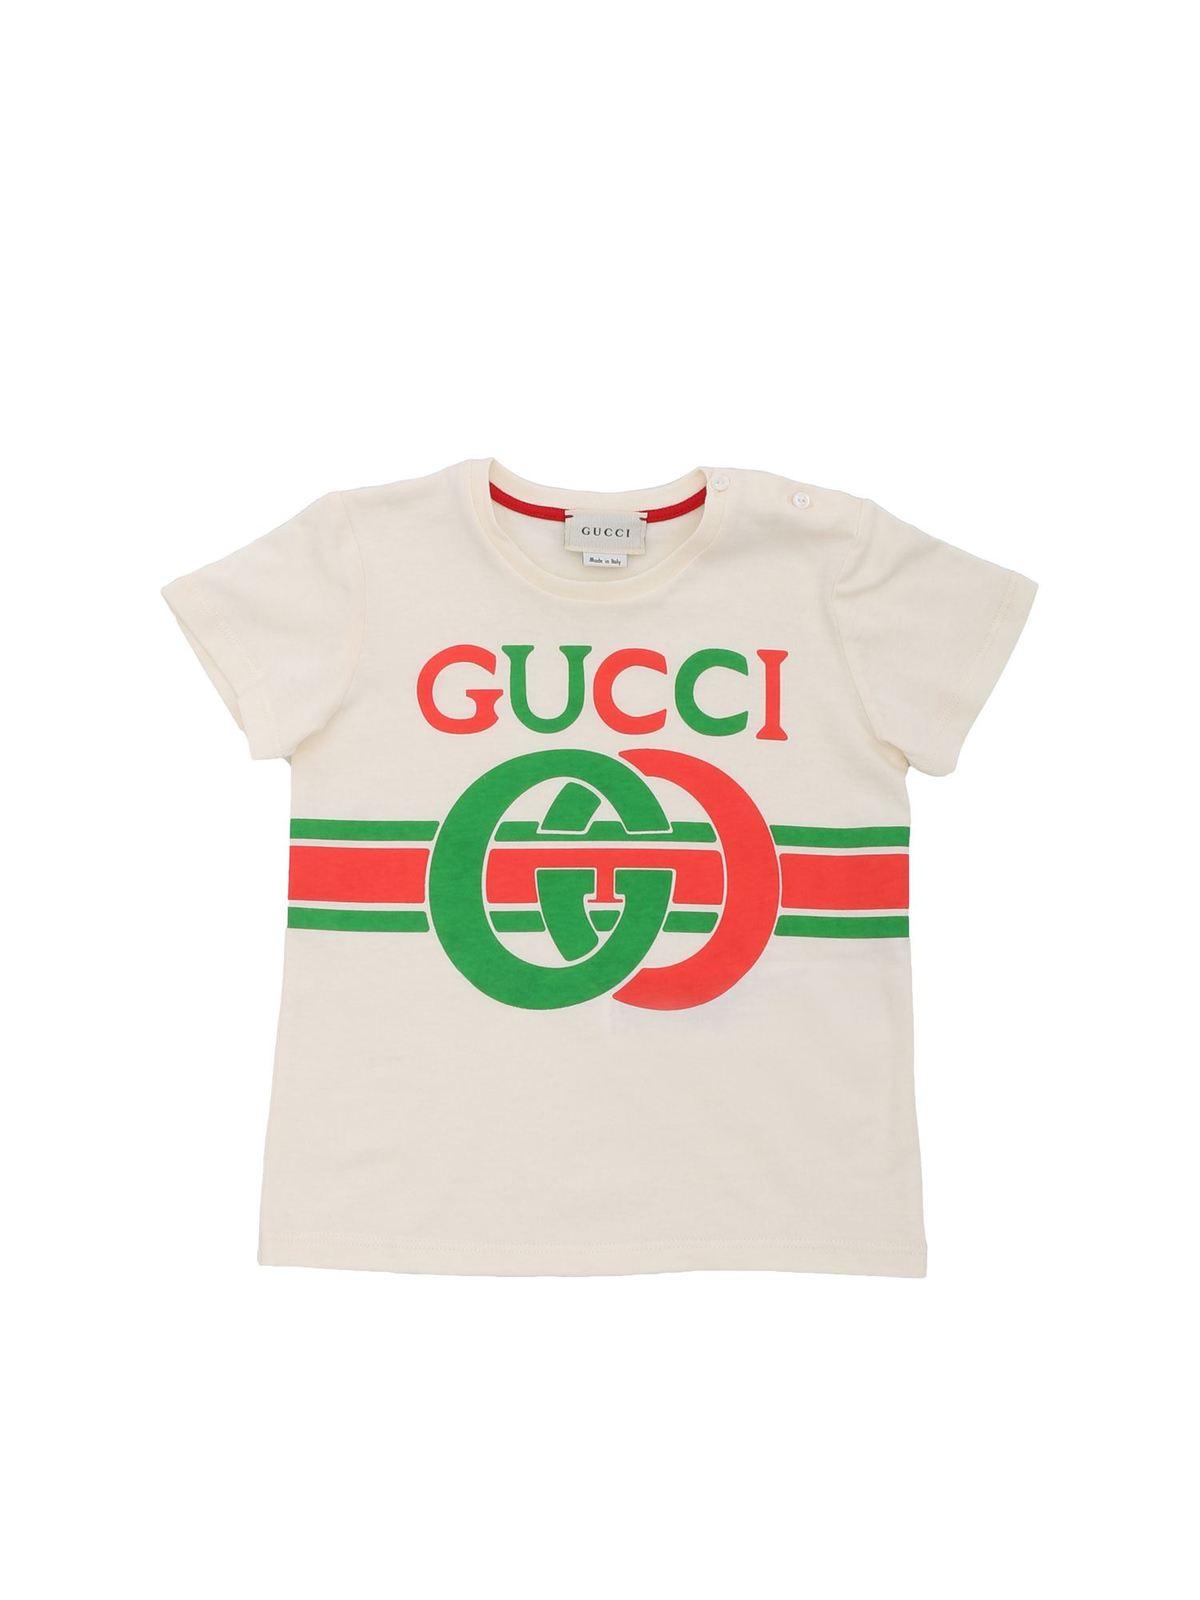 Gucci Cotton Cream Colored T-shirt With GG Print - Lyst